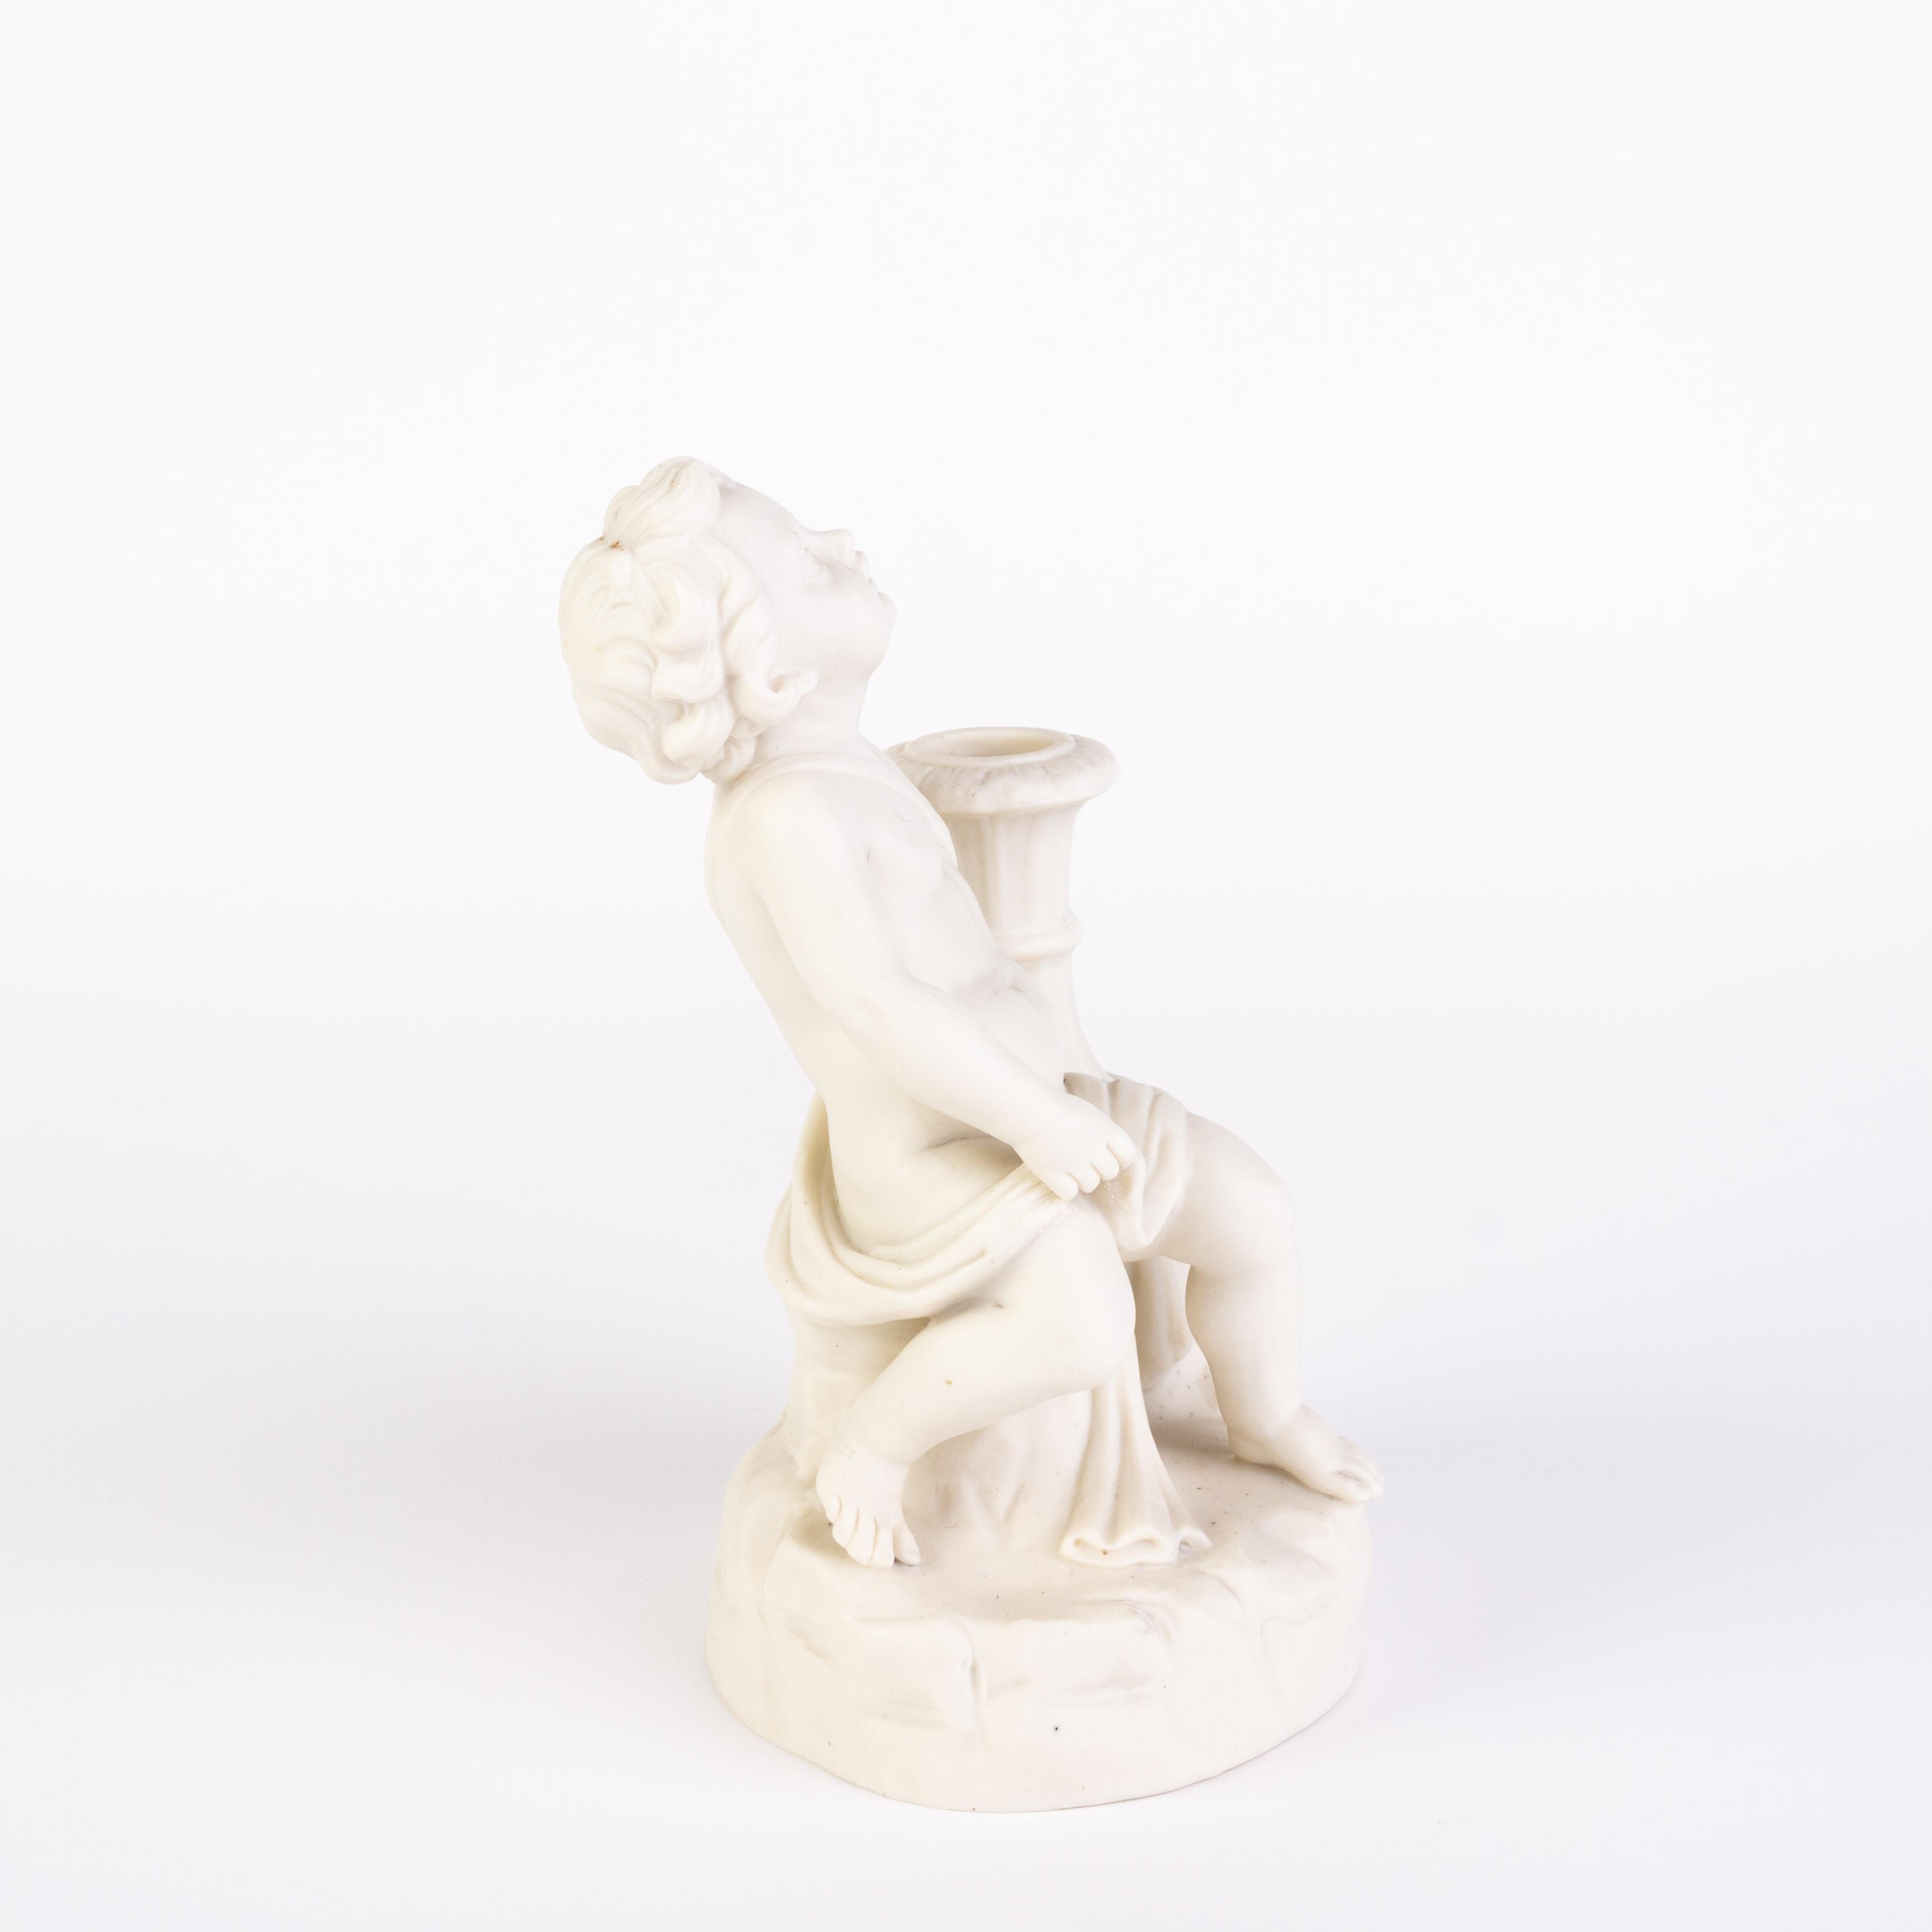 Victorian Copeland Parian Ware Statue of a Putto Candle Holder 19th Century
Good condition
From a private collection.
Free international shipping.